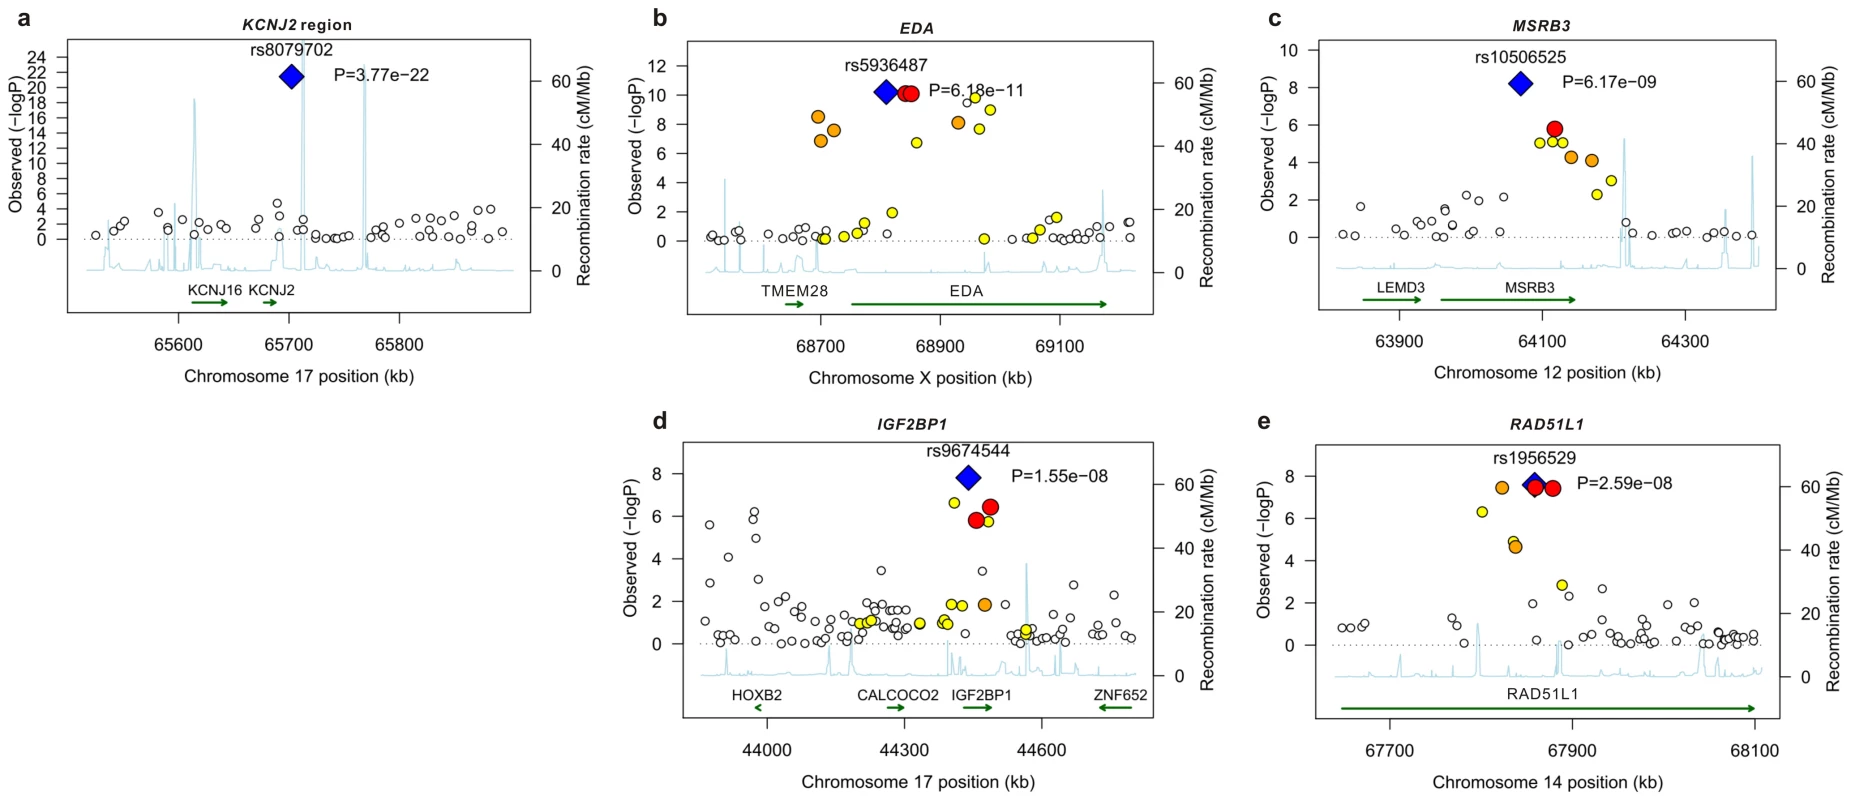 Linkage disequilibrium and association at loci reaching genome-wide significance for primary tooth development in meta-analysis of NFBC1966 and ALSPAC.